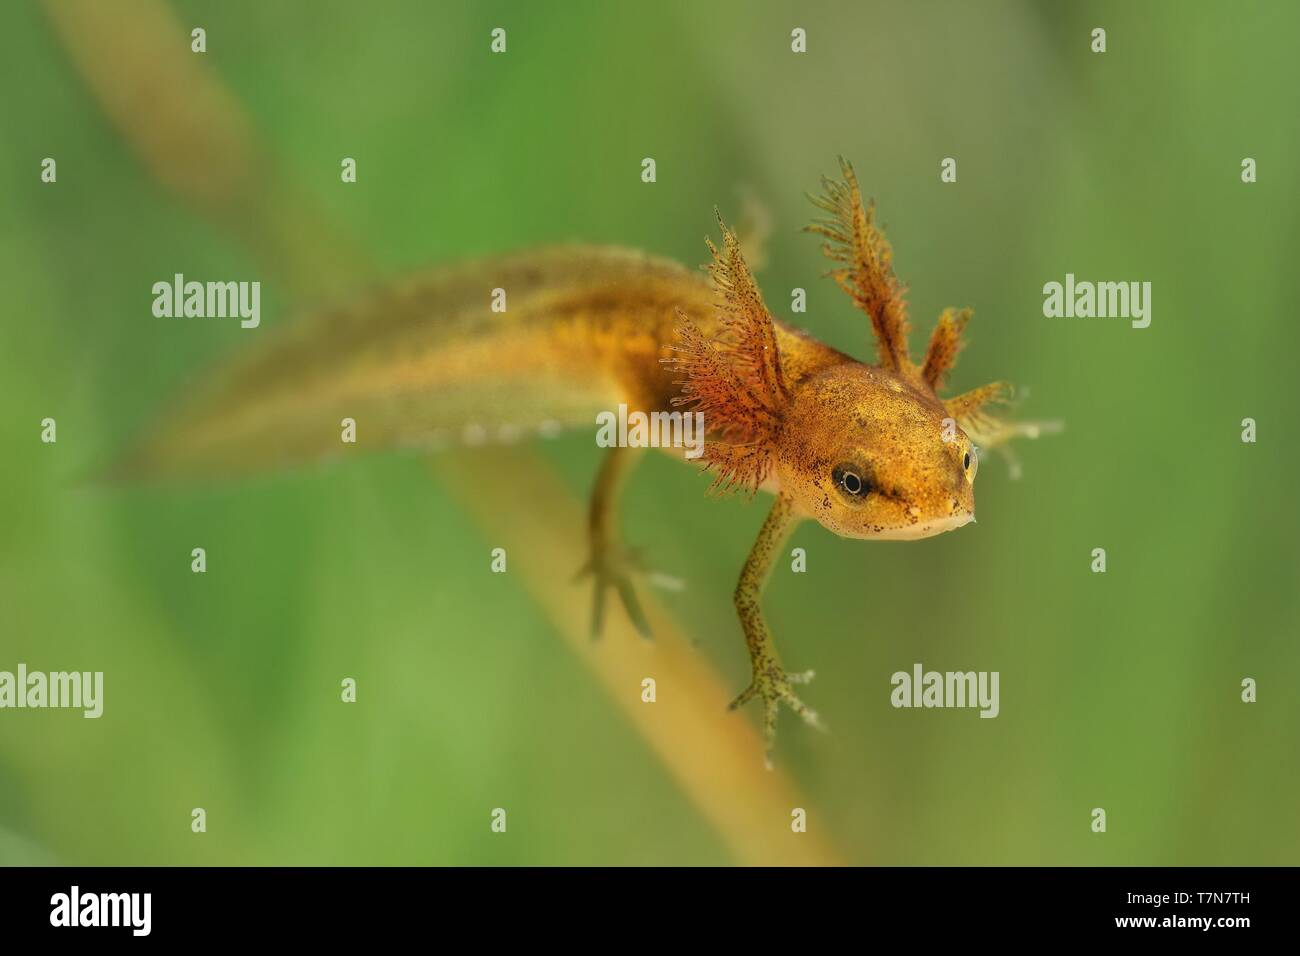 Smooth Newt nymph (Triturus vulgaris) swimming in the water. Green background, larvae with outer gills. Stock Photo